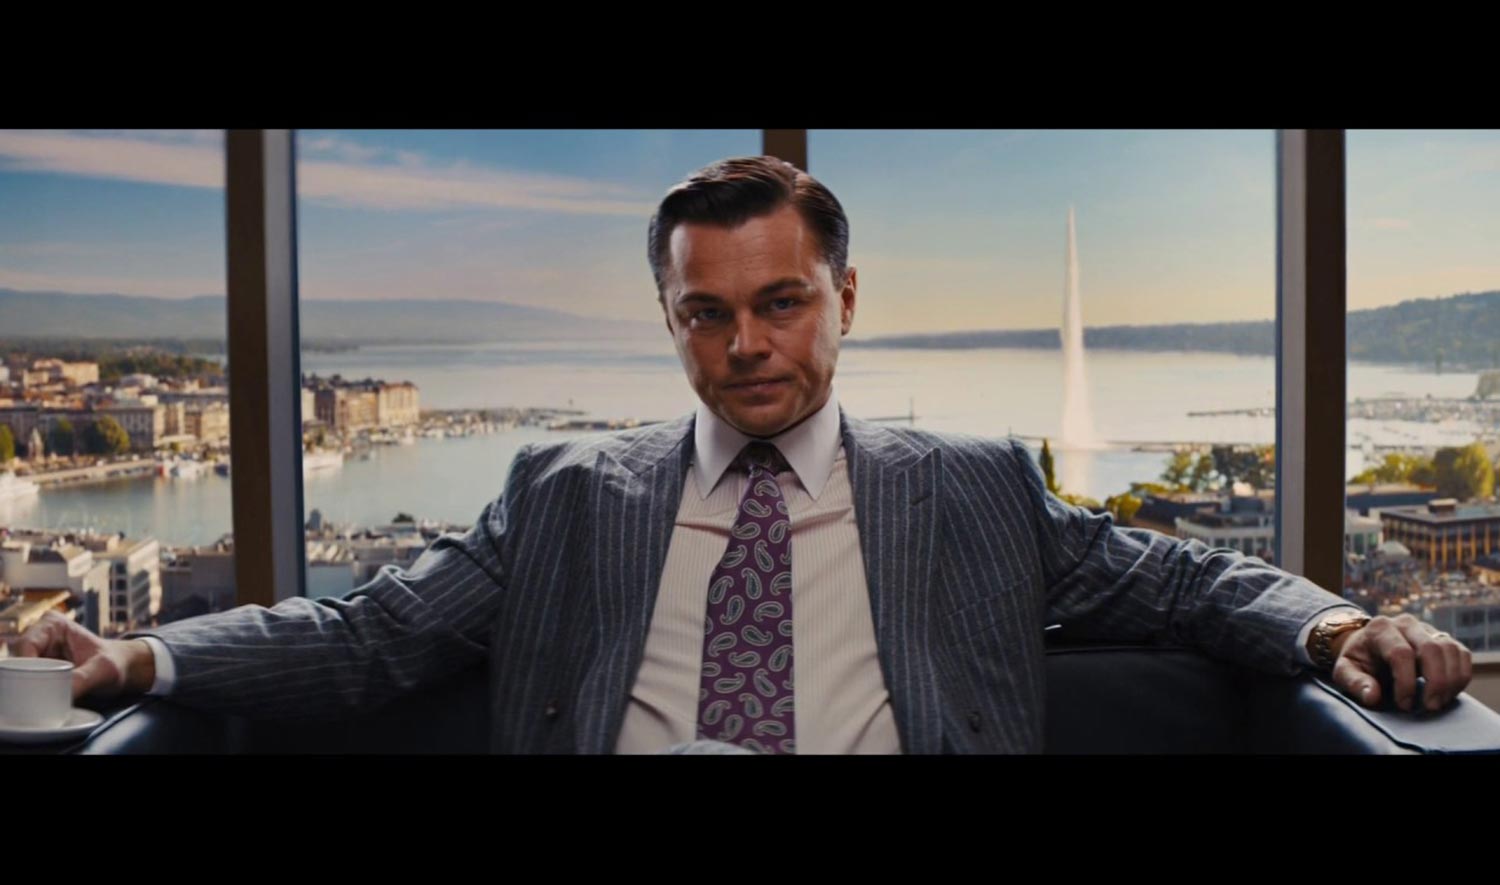 Wolf Of Wall Street Sues Filmmakers For 440m Freedman Taitelman Cooley Llp Los Angeles 